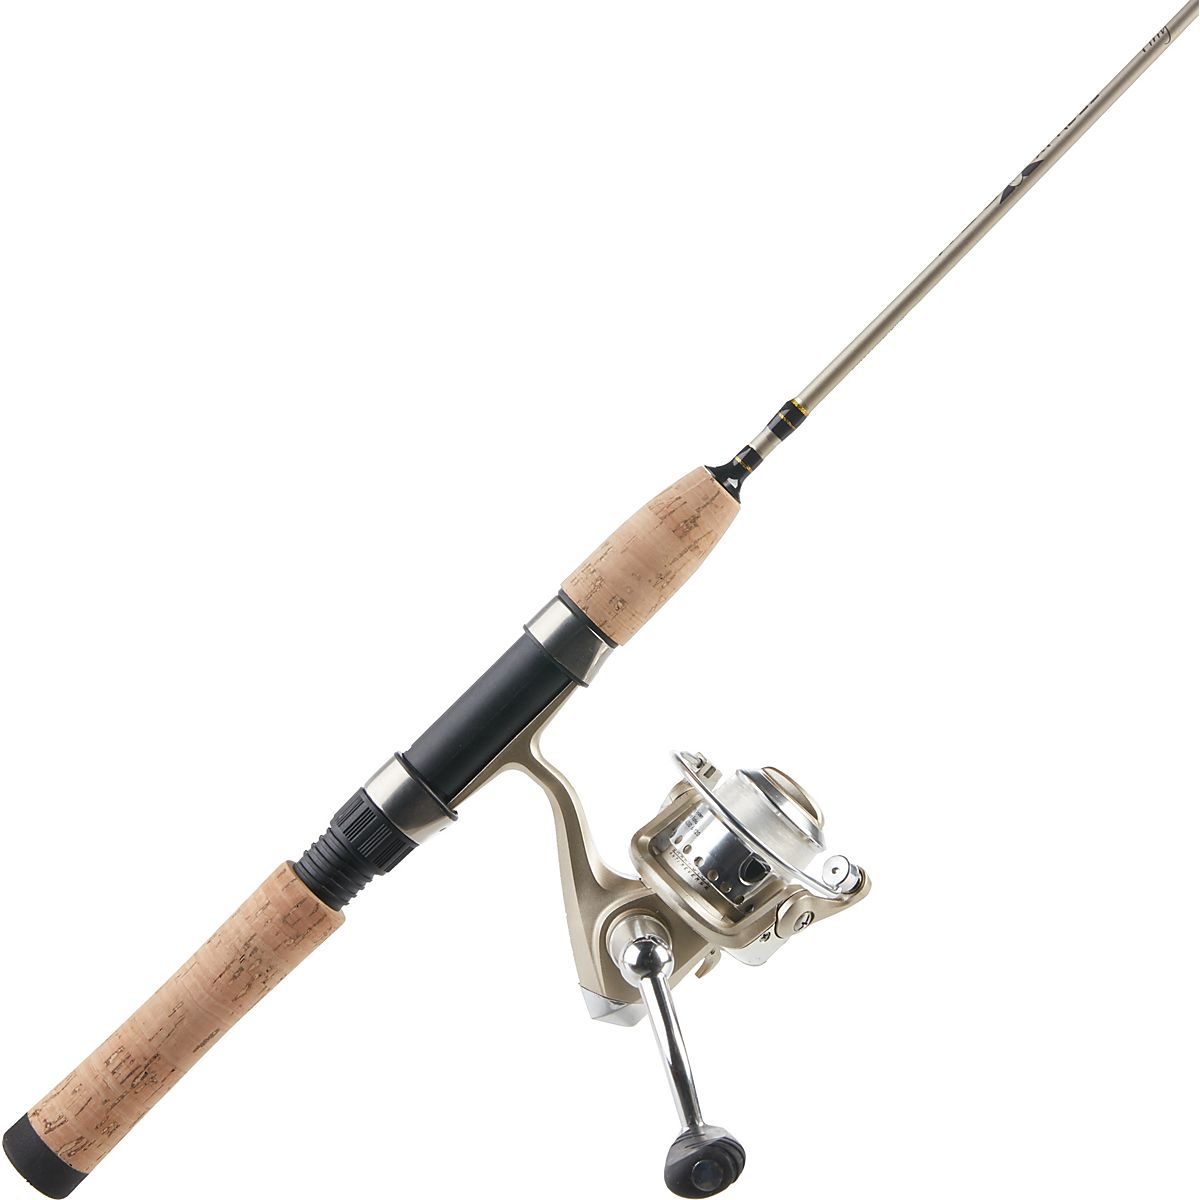 Buy H2O XPRESS Recon 7' Spinning Rod and Reel Combo Online at